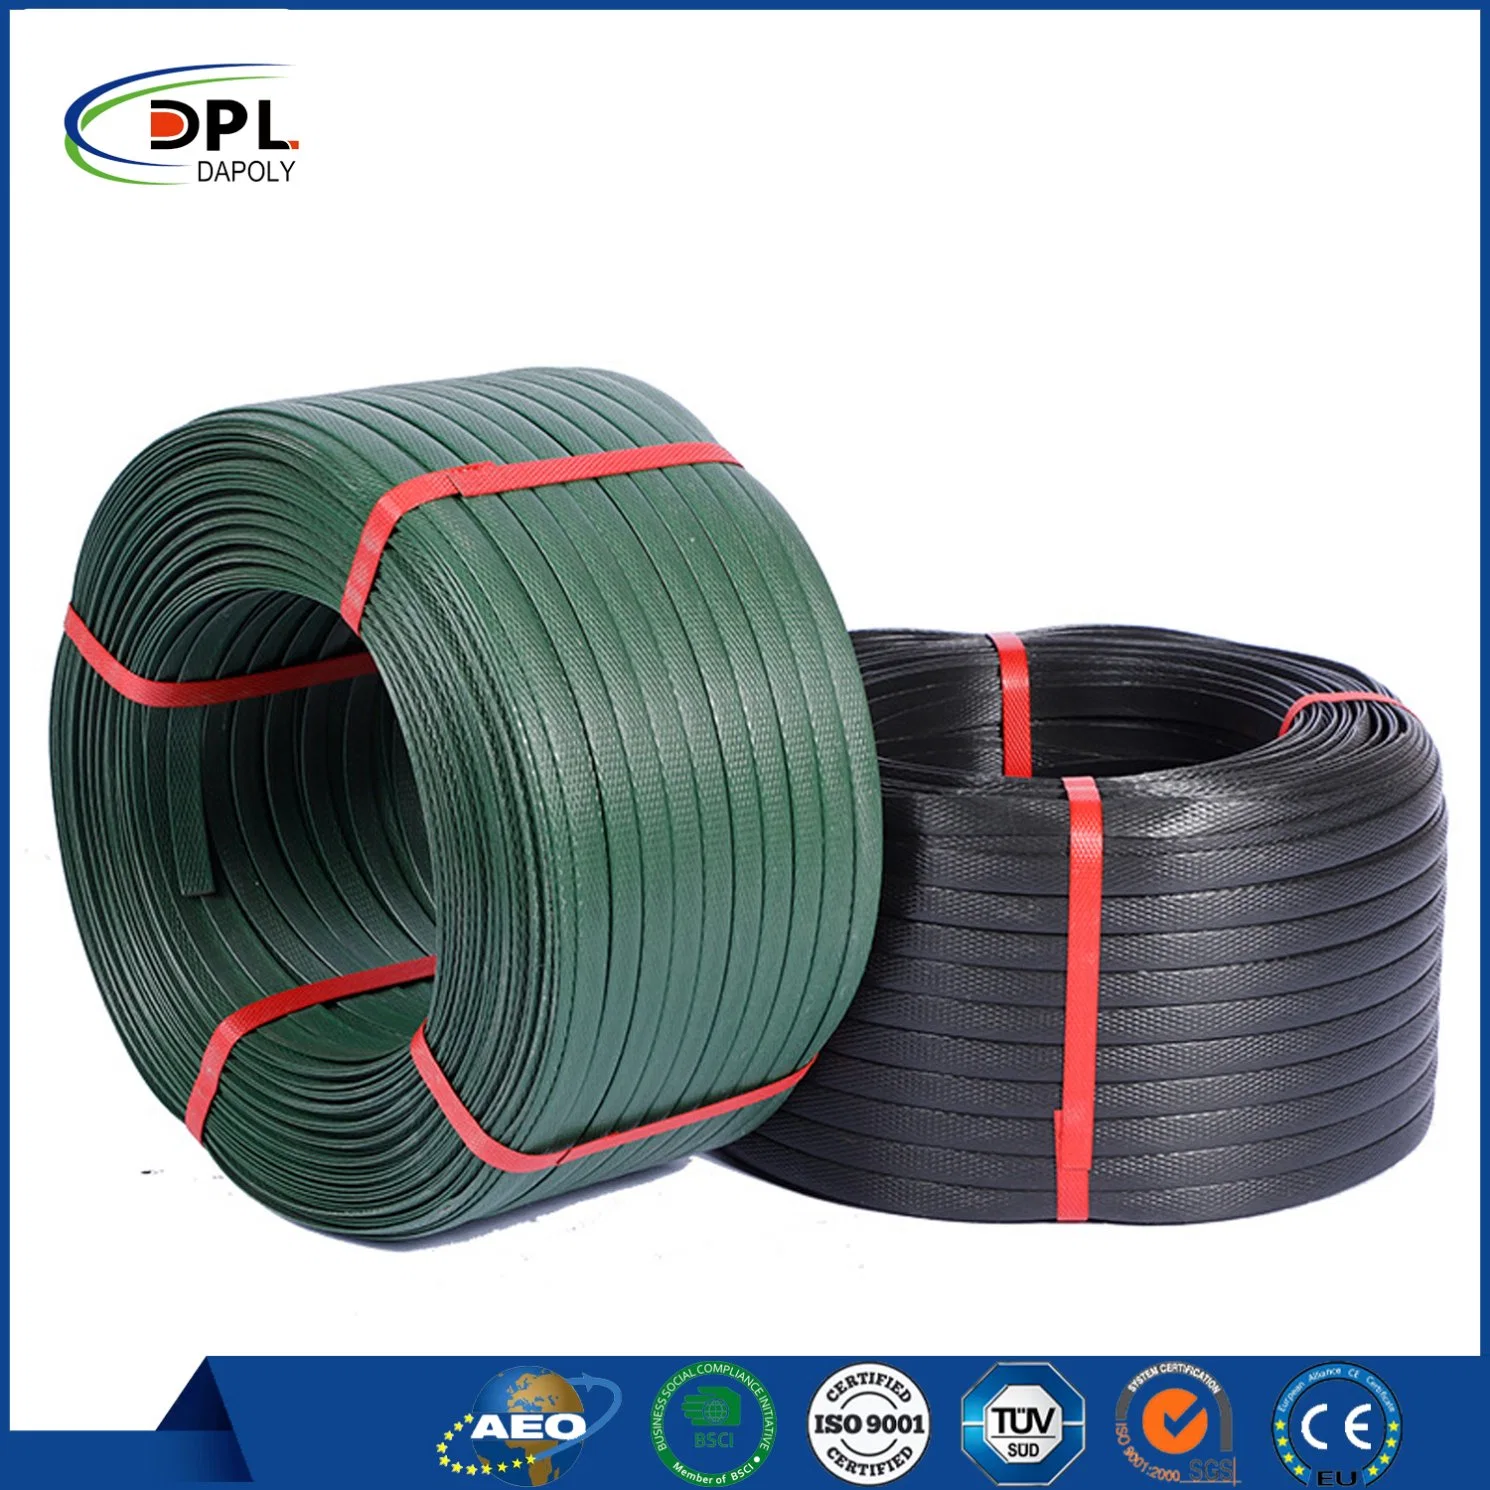 New Plastic Materials PP High Quality Packing Strapping Belt / Band / Tape Good Sell